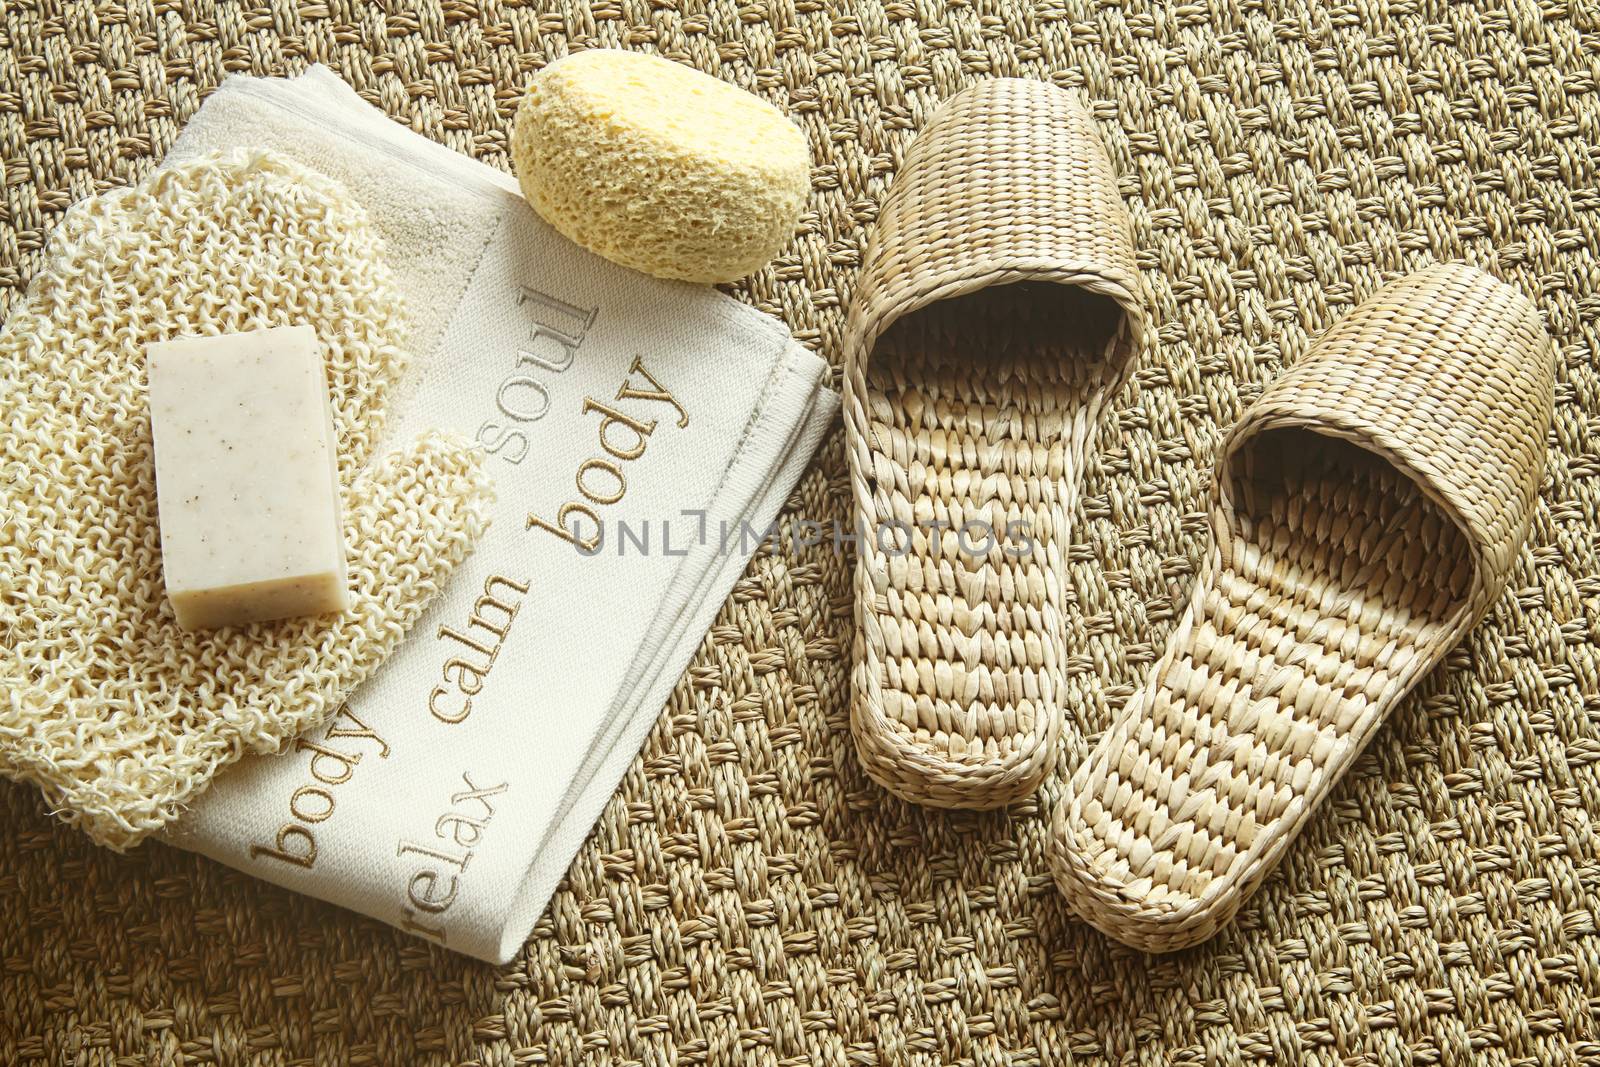 Spa setting with slippers, towel and soap by Sandralise